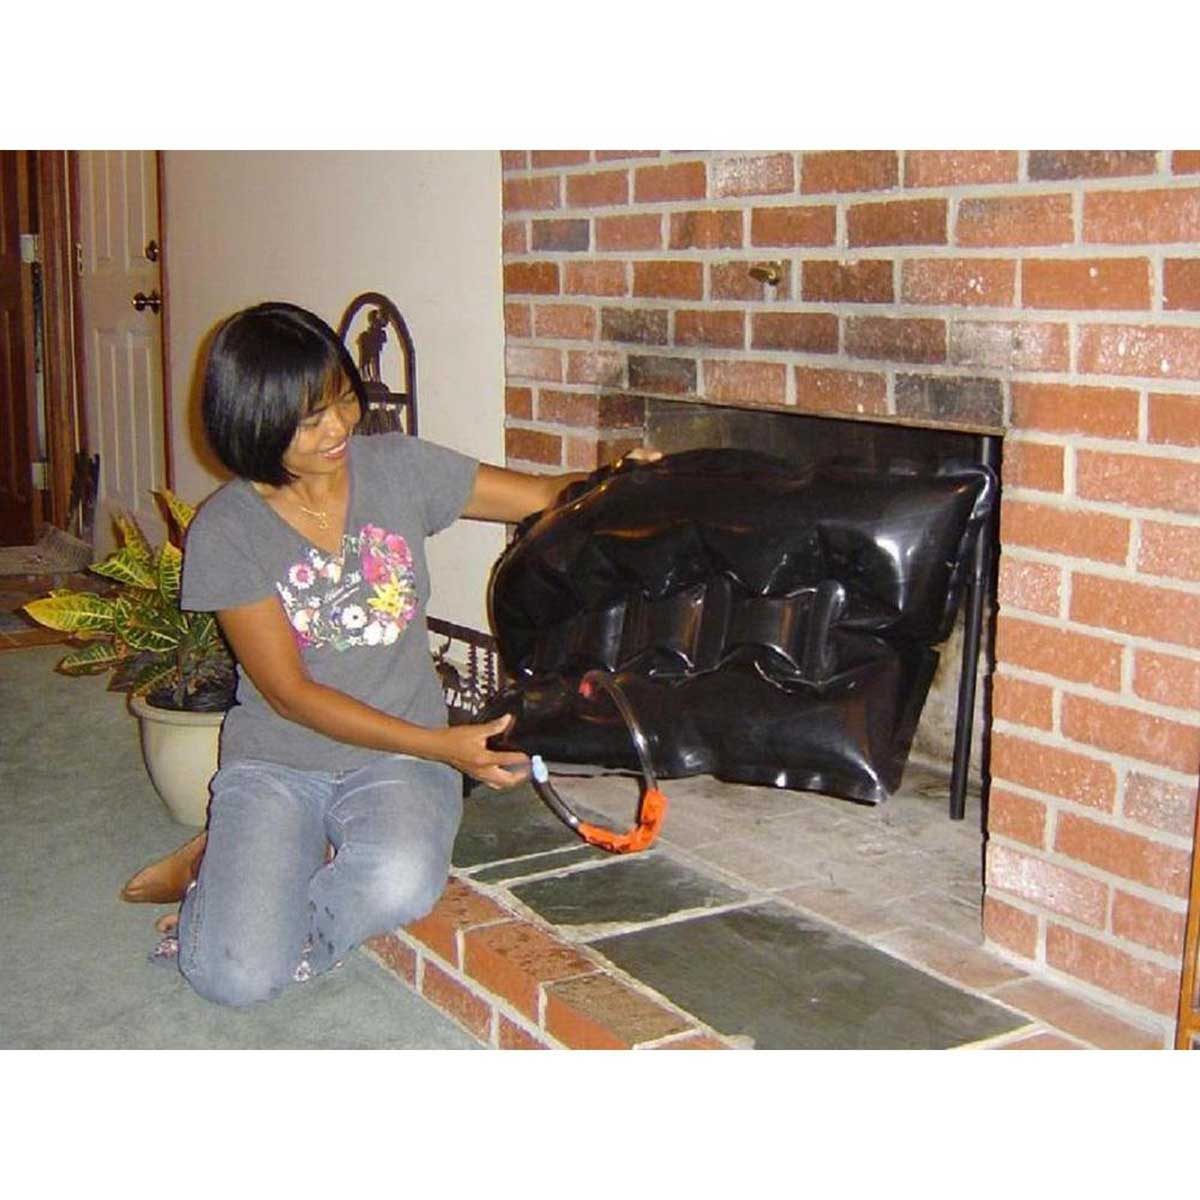 How to Seal an Unused Fireplace and Save Money on Heating Bills - Dengarden